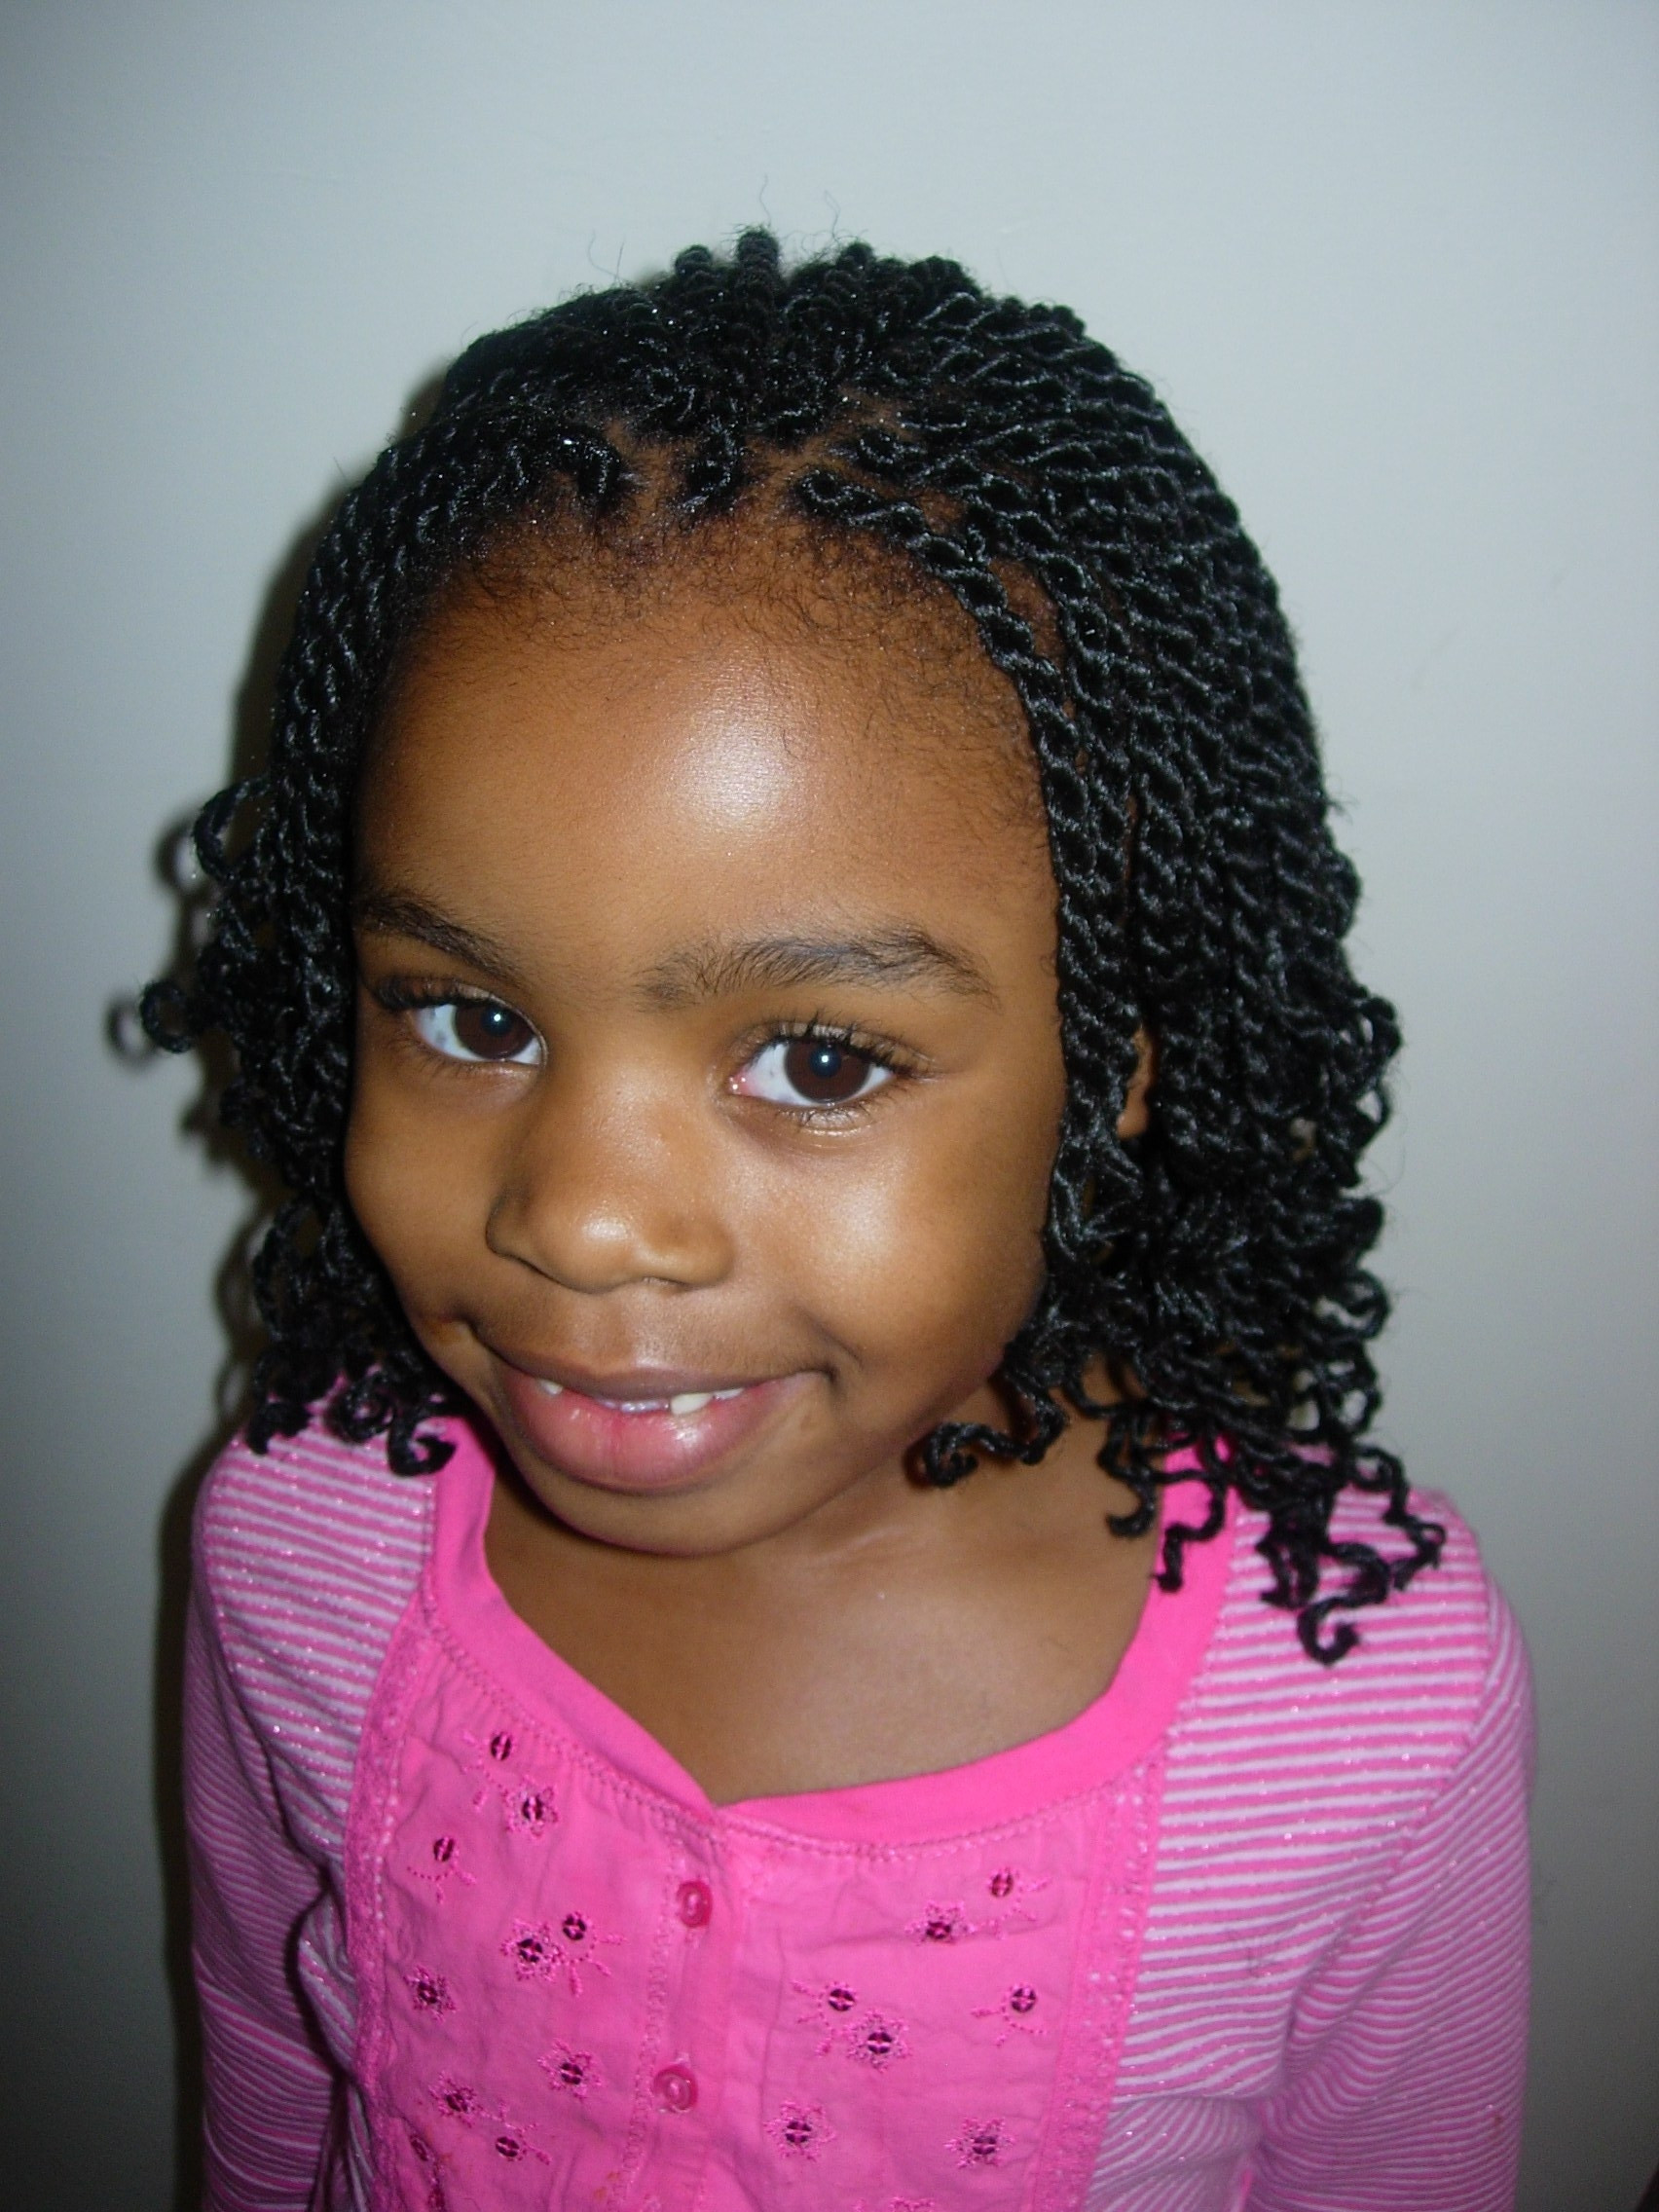 24 Of the Best Ideas for Black toddler Girl Hairstyles - Home, Family